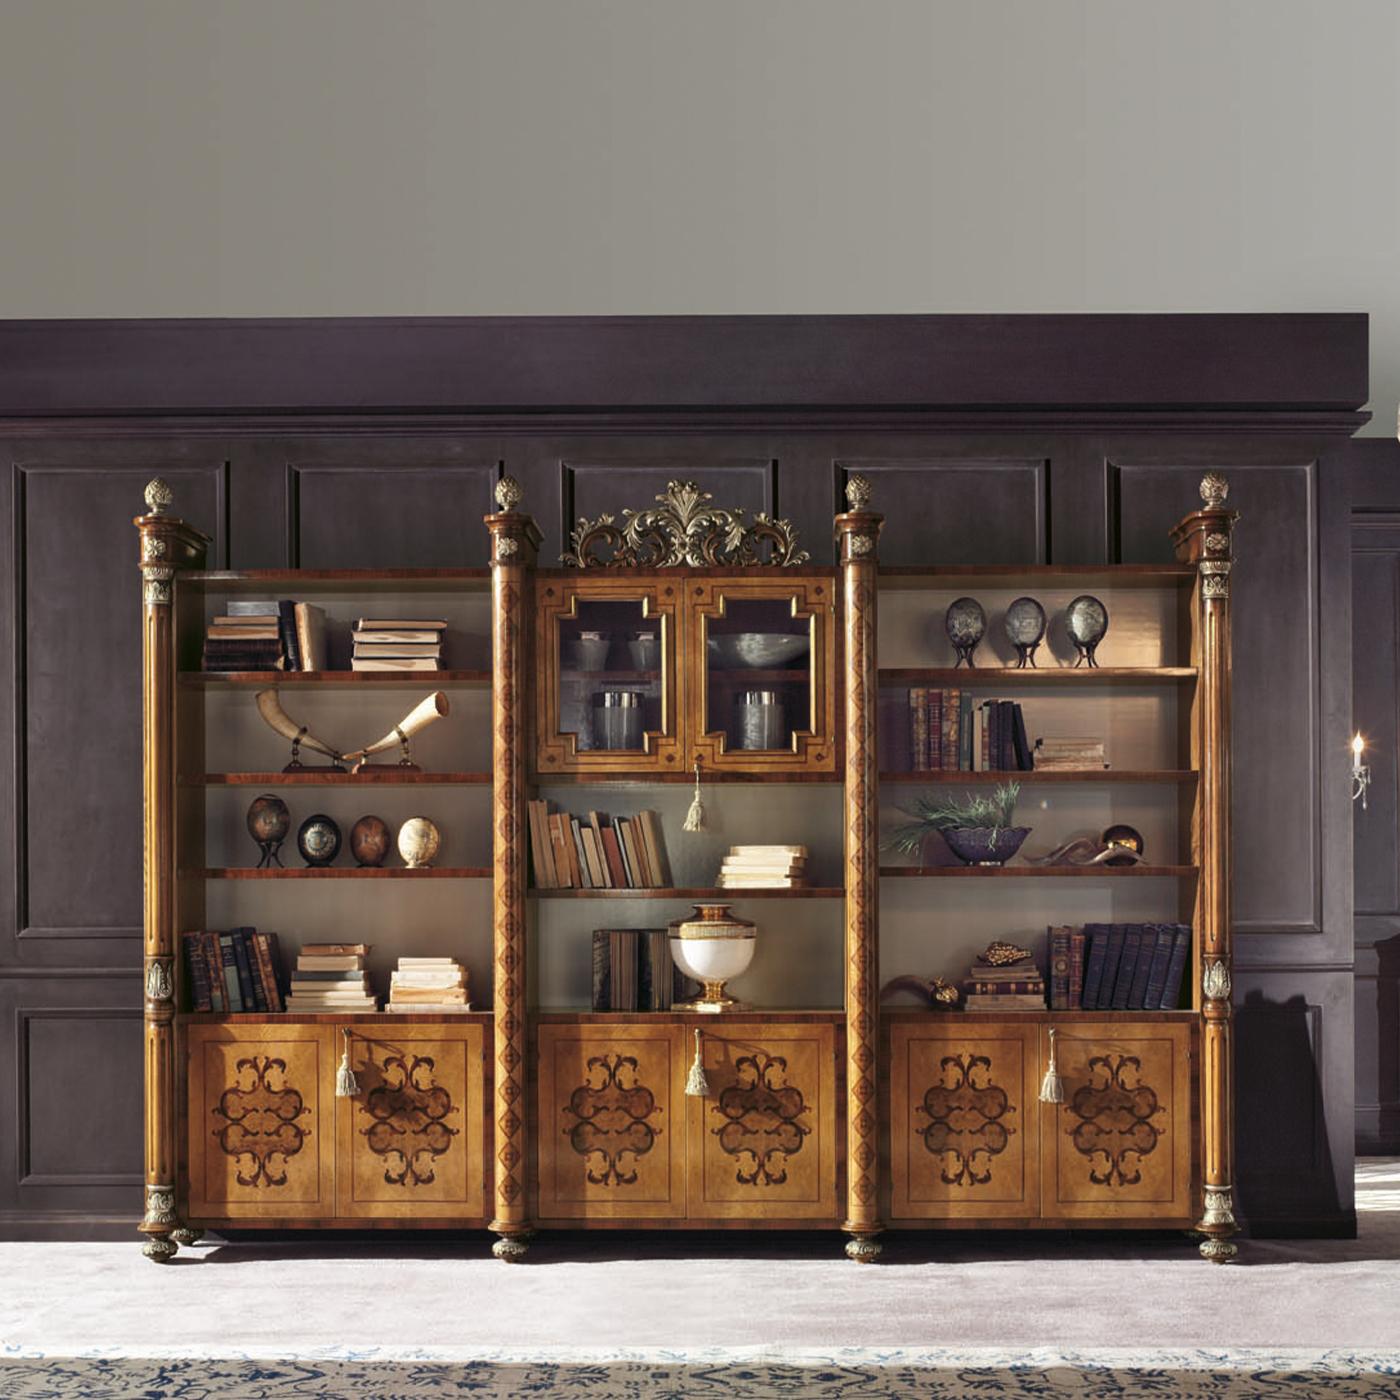 Arranged in three units respectively featuring four shelves and a closed compartment, this majestic bookcase flaunts a prized and bold aesthetic. Feathered ash, walnut briar, and rosewood are used to craft its refined inlays completed by the carved